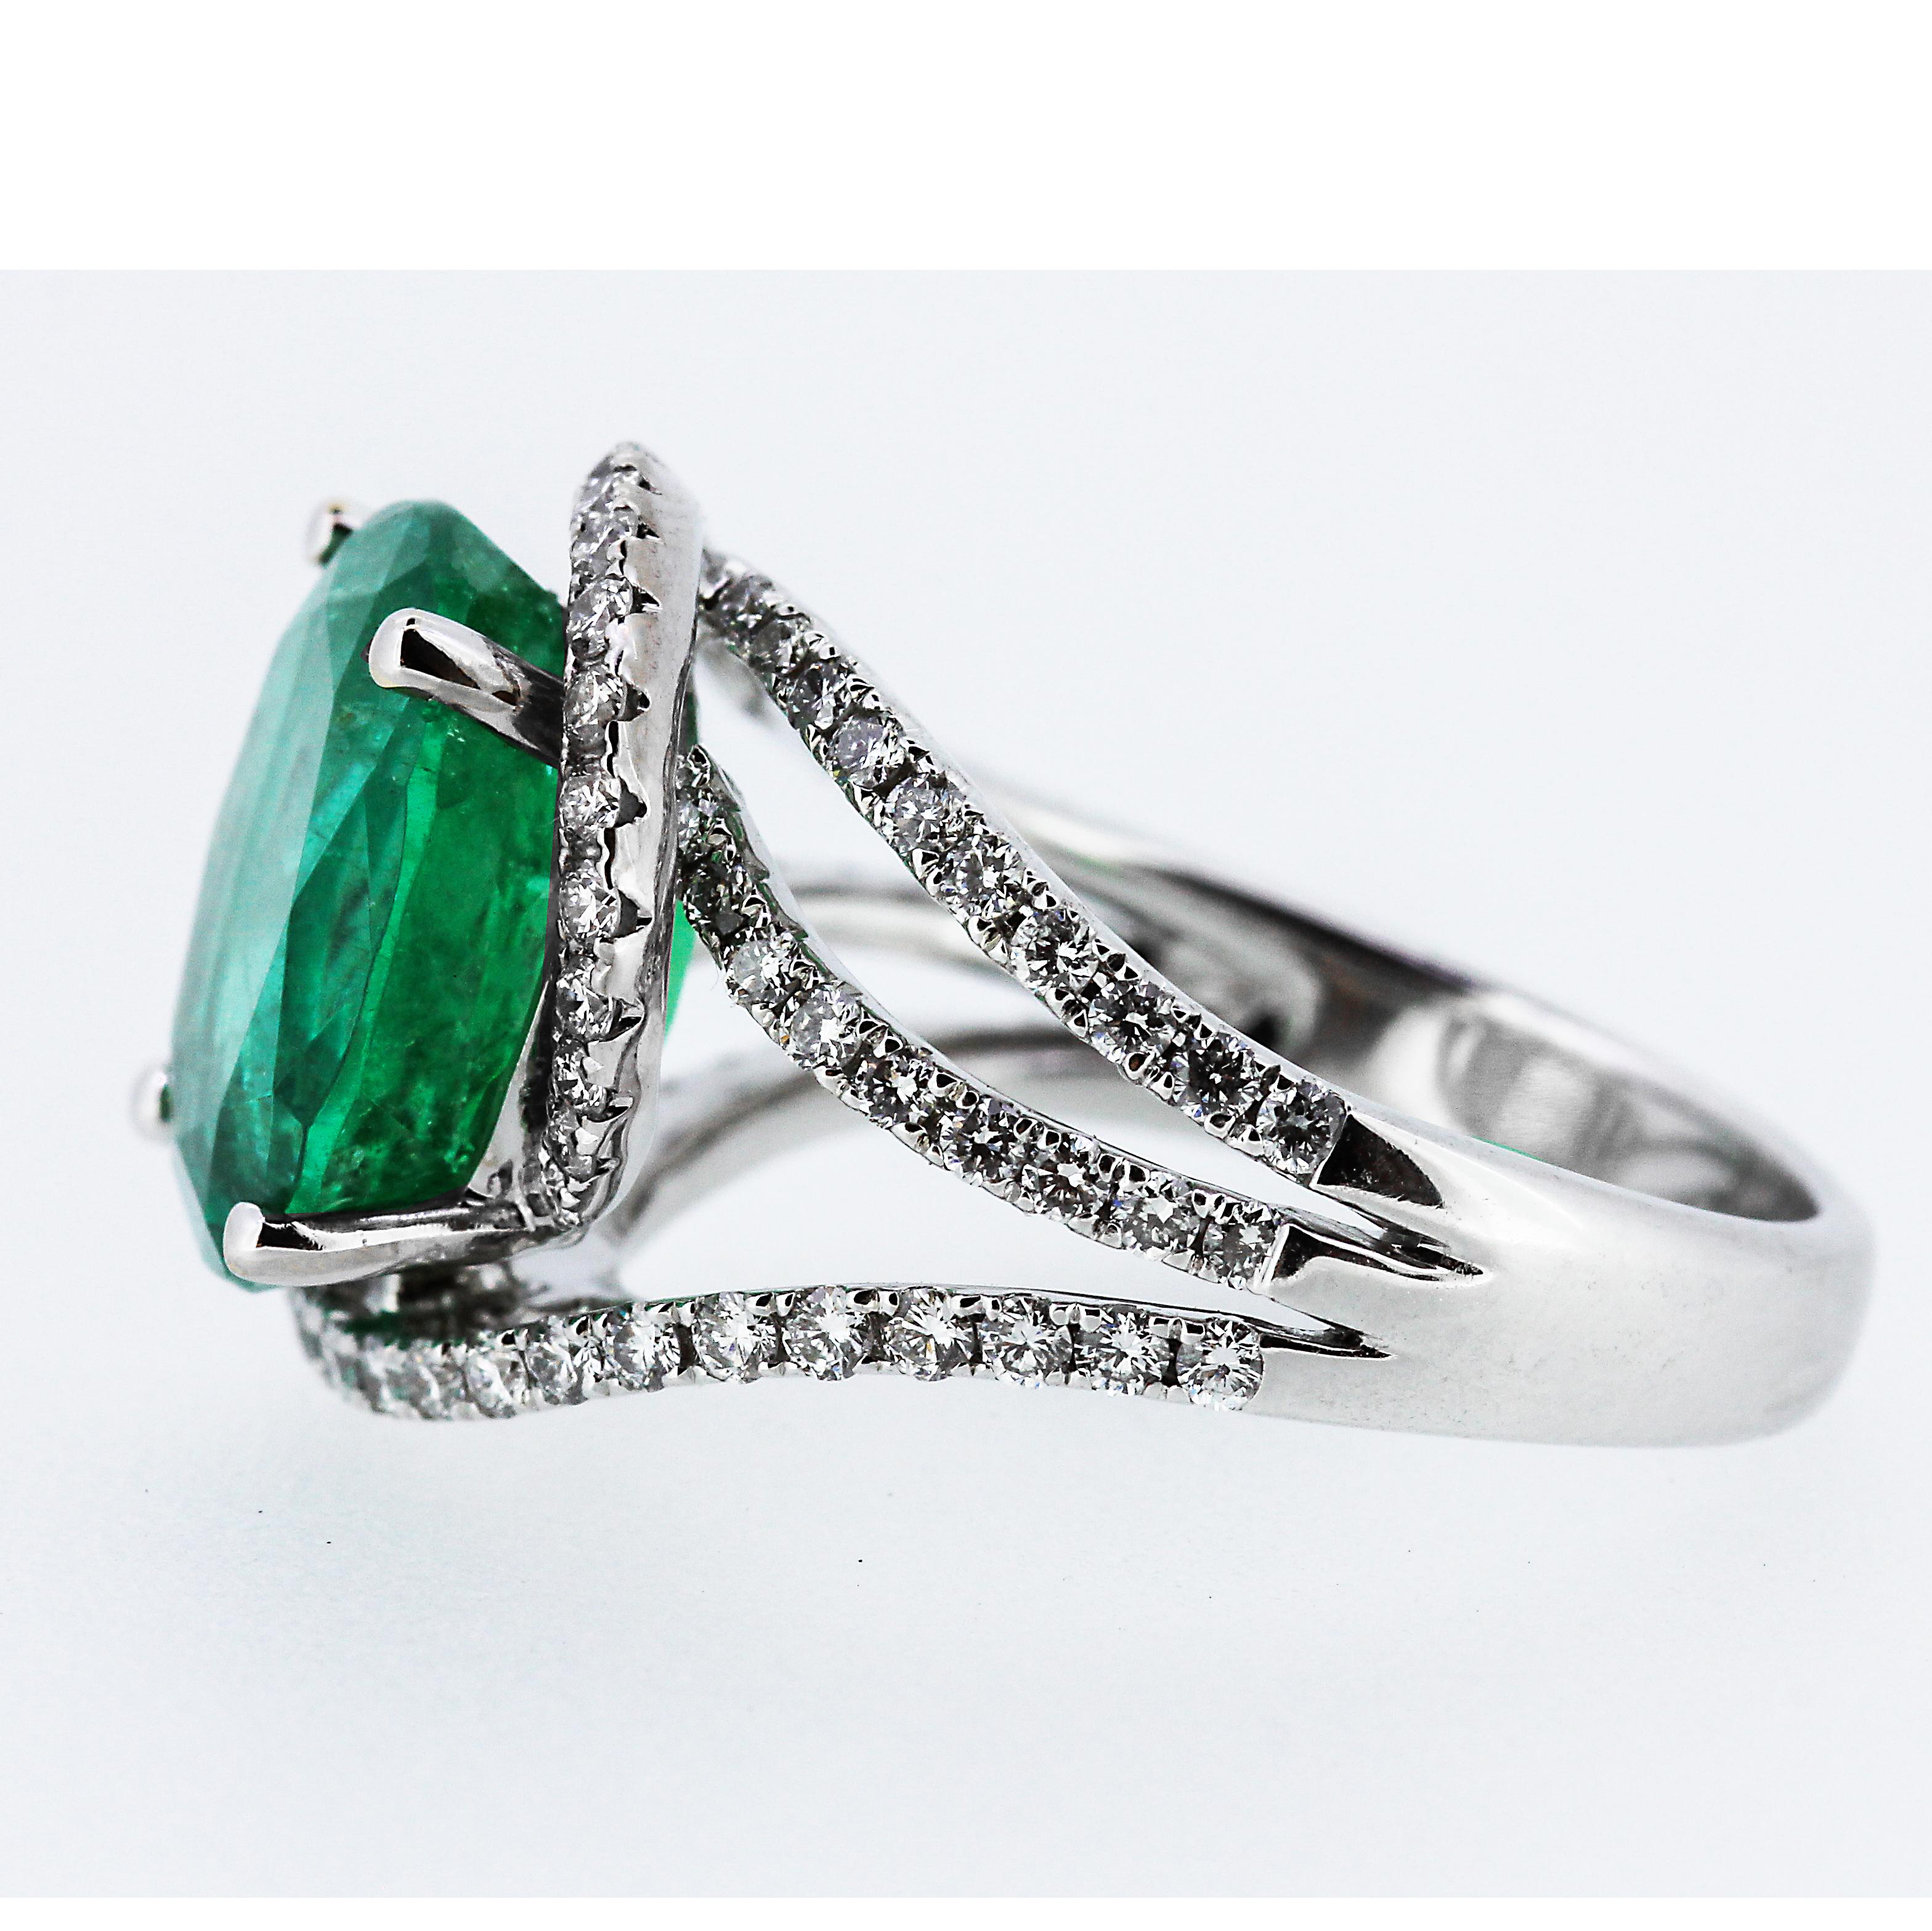 A remarkable fine Colombian emerald set in 18ct white gold and surrounded by a beautiful border of round brilliant cut diamonds. The 5.3 carat emerald shows very good vivid green colour and high transparency.

1 x oval shape faceted emerald,  weight